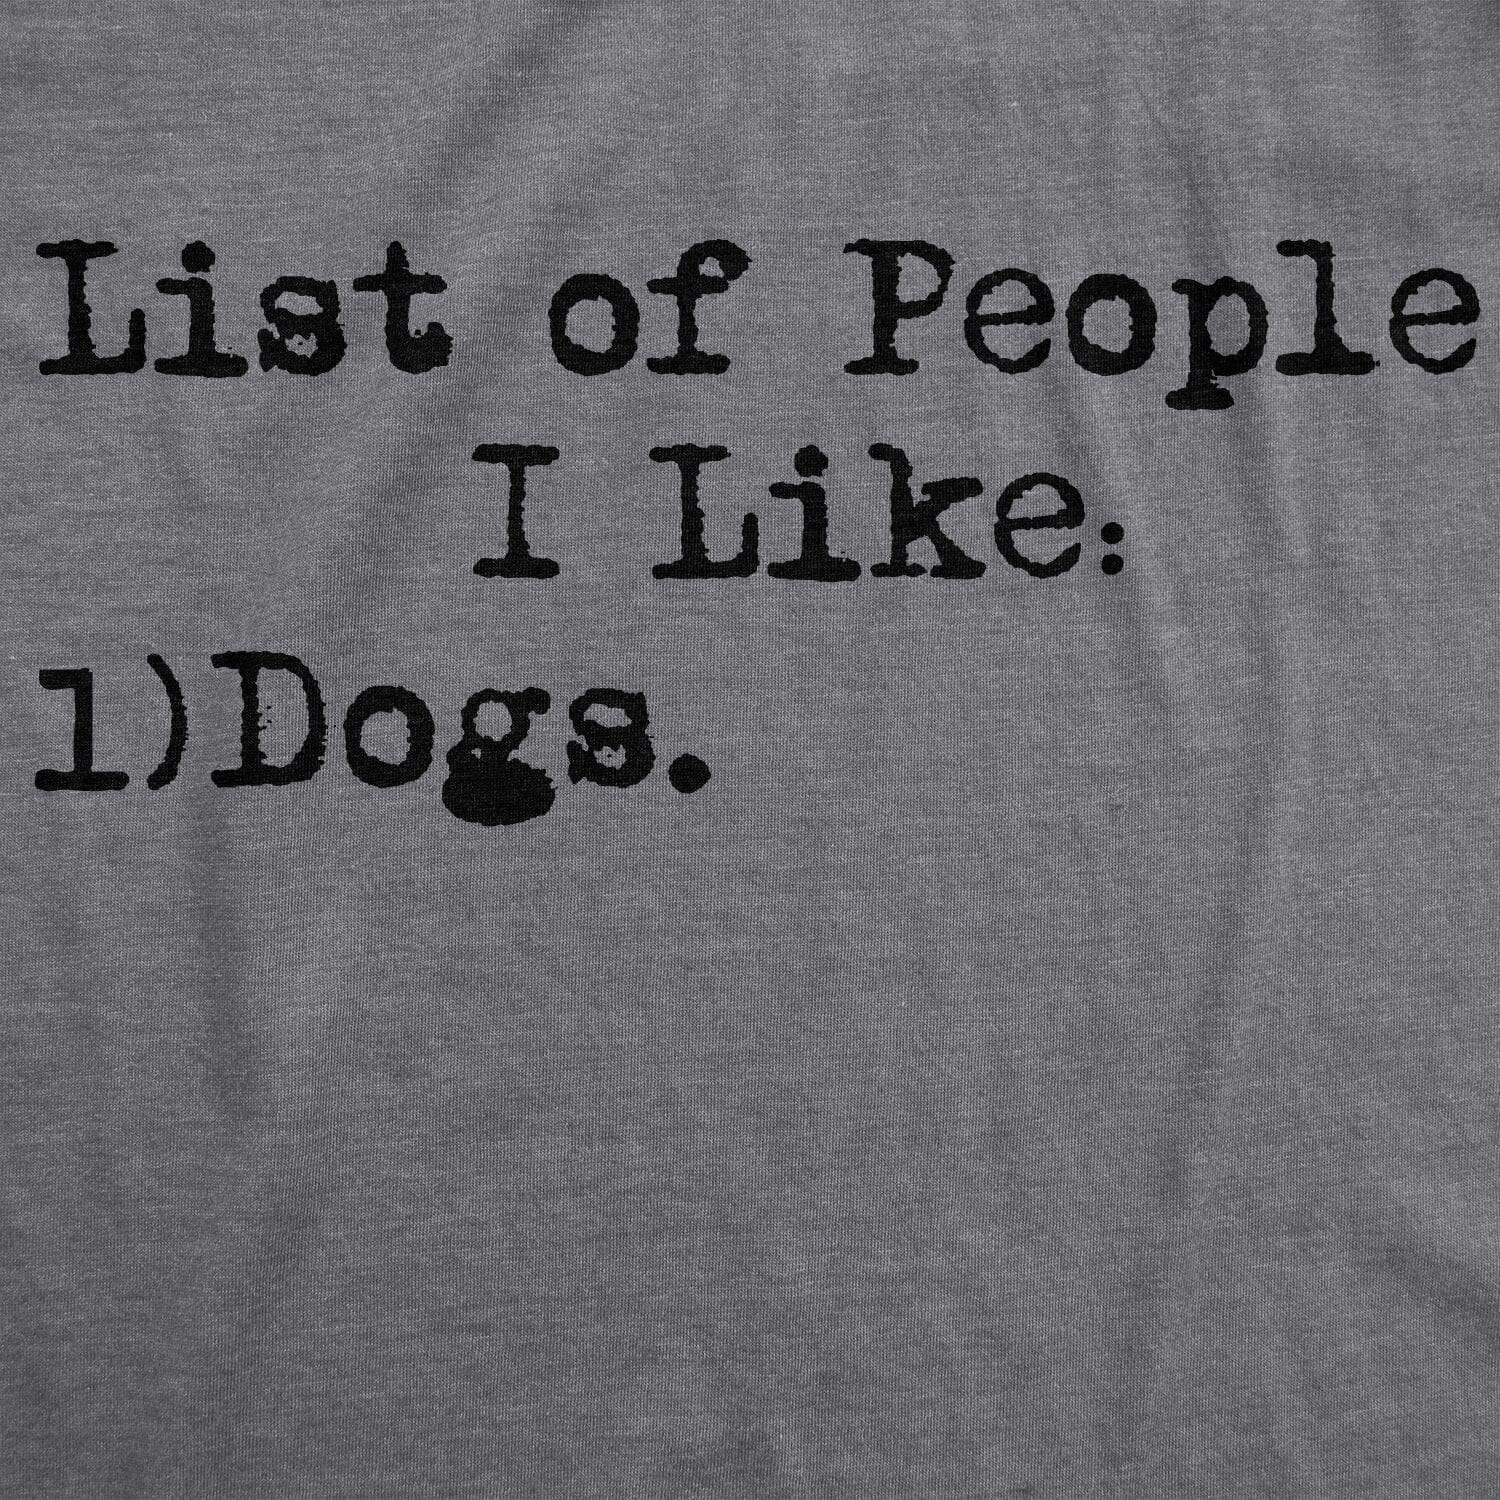 List Of People I Like: Dogs Men's Tshirt  -  Crazy Dog T-Shirts